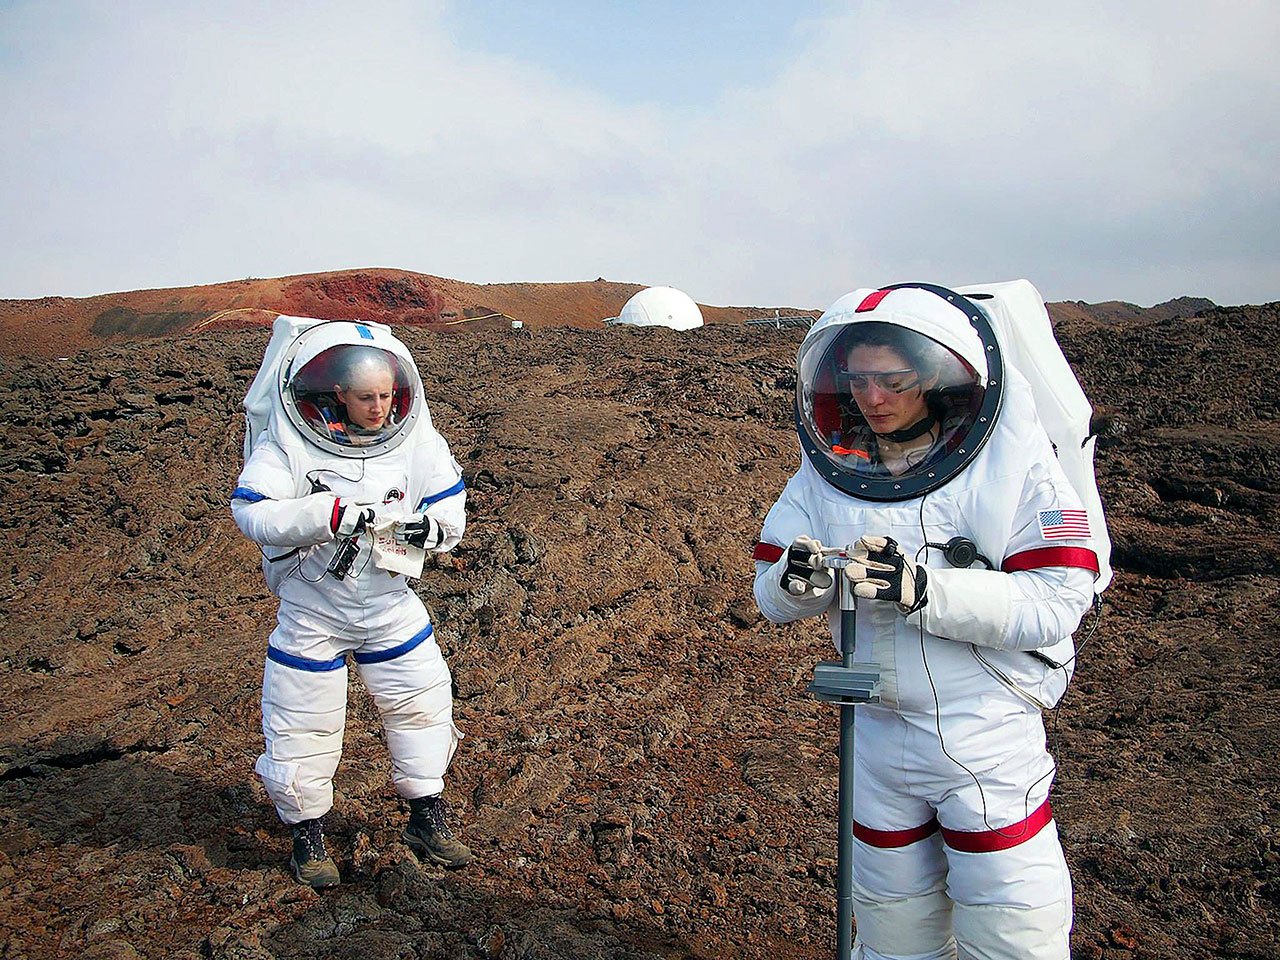 In this May 23, 2014 photo, Lucie Poulet (right) uses a geotechnical tool while Annie Caraccio records the data during a previous study outside the domed structure that will house six researchers for eight months in an environment meant to simulate an expedition to Mars, on Mauna Loa on the Big Island of Hawaii. (Ross Lockwood/University of Hawaii via AP)